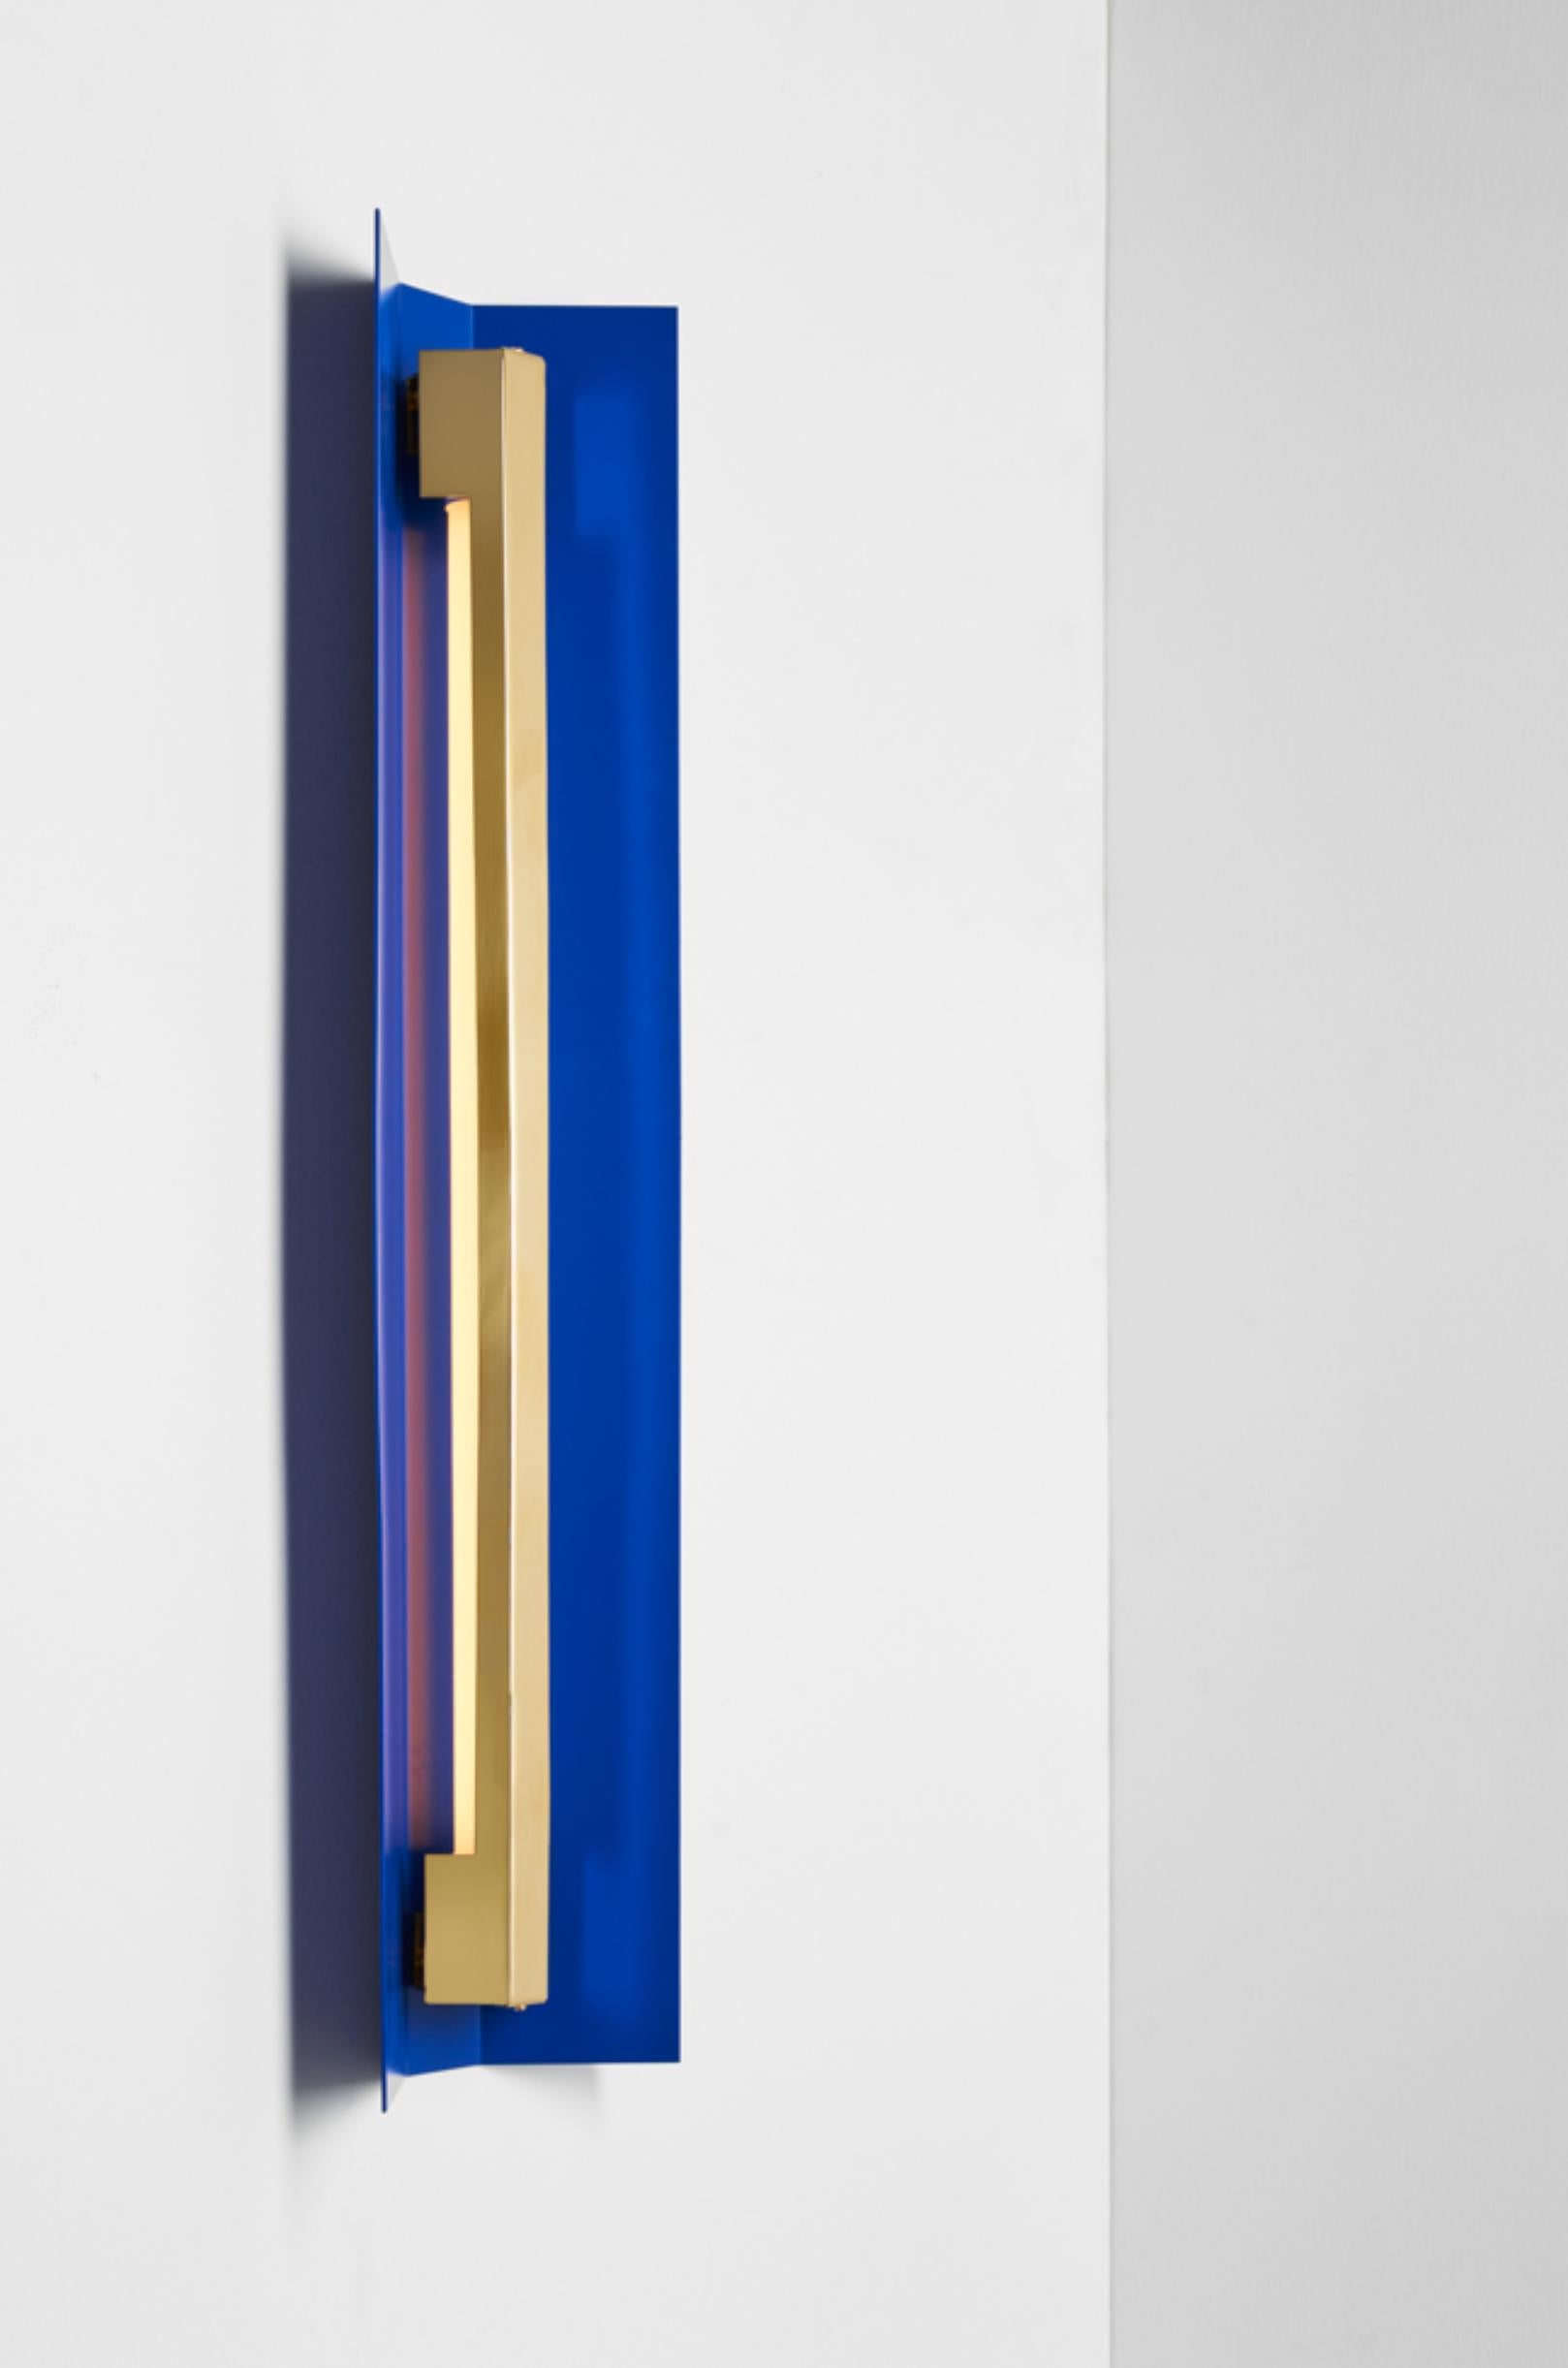 Medium Misalliance Ex ultramarine wall light by Lexavala
Dimensions: D 16 x W 100 x H 8 cm
Materials: powder coated shade with details made of brass or stainless steel.

There are two lenghts of socket covers, extending over the LED. Two short